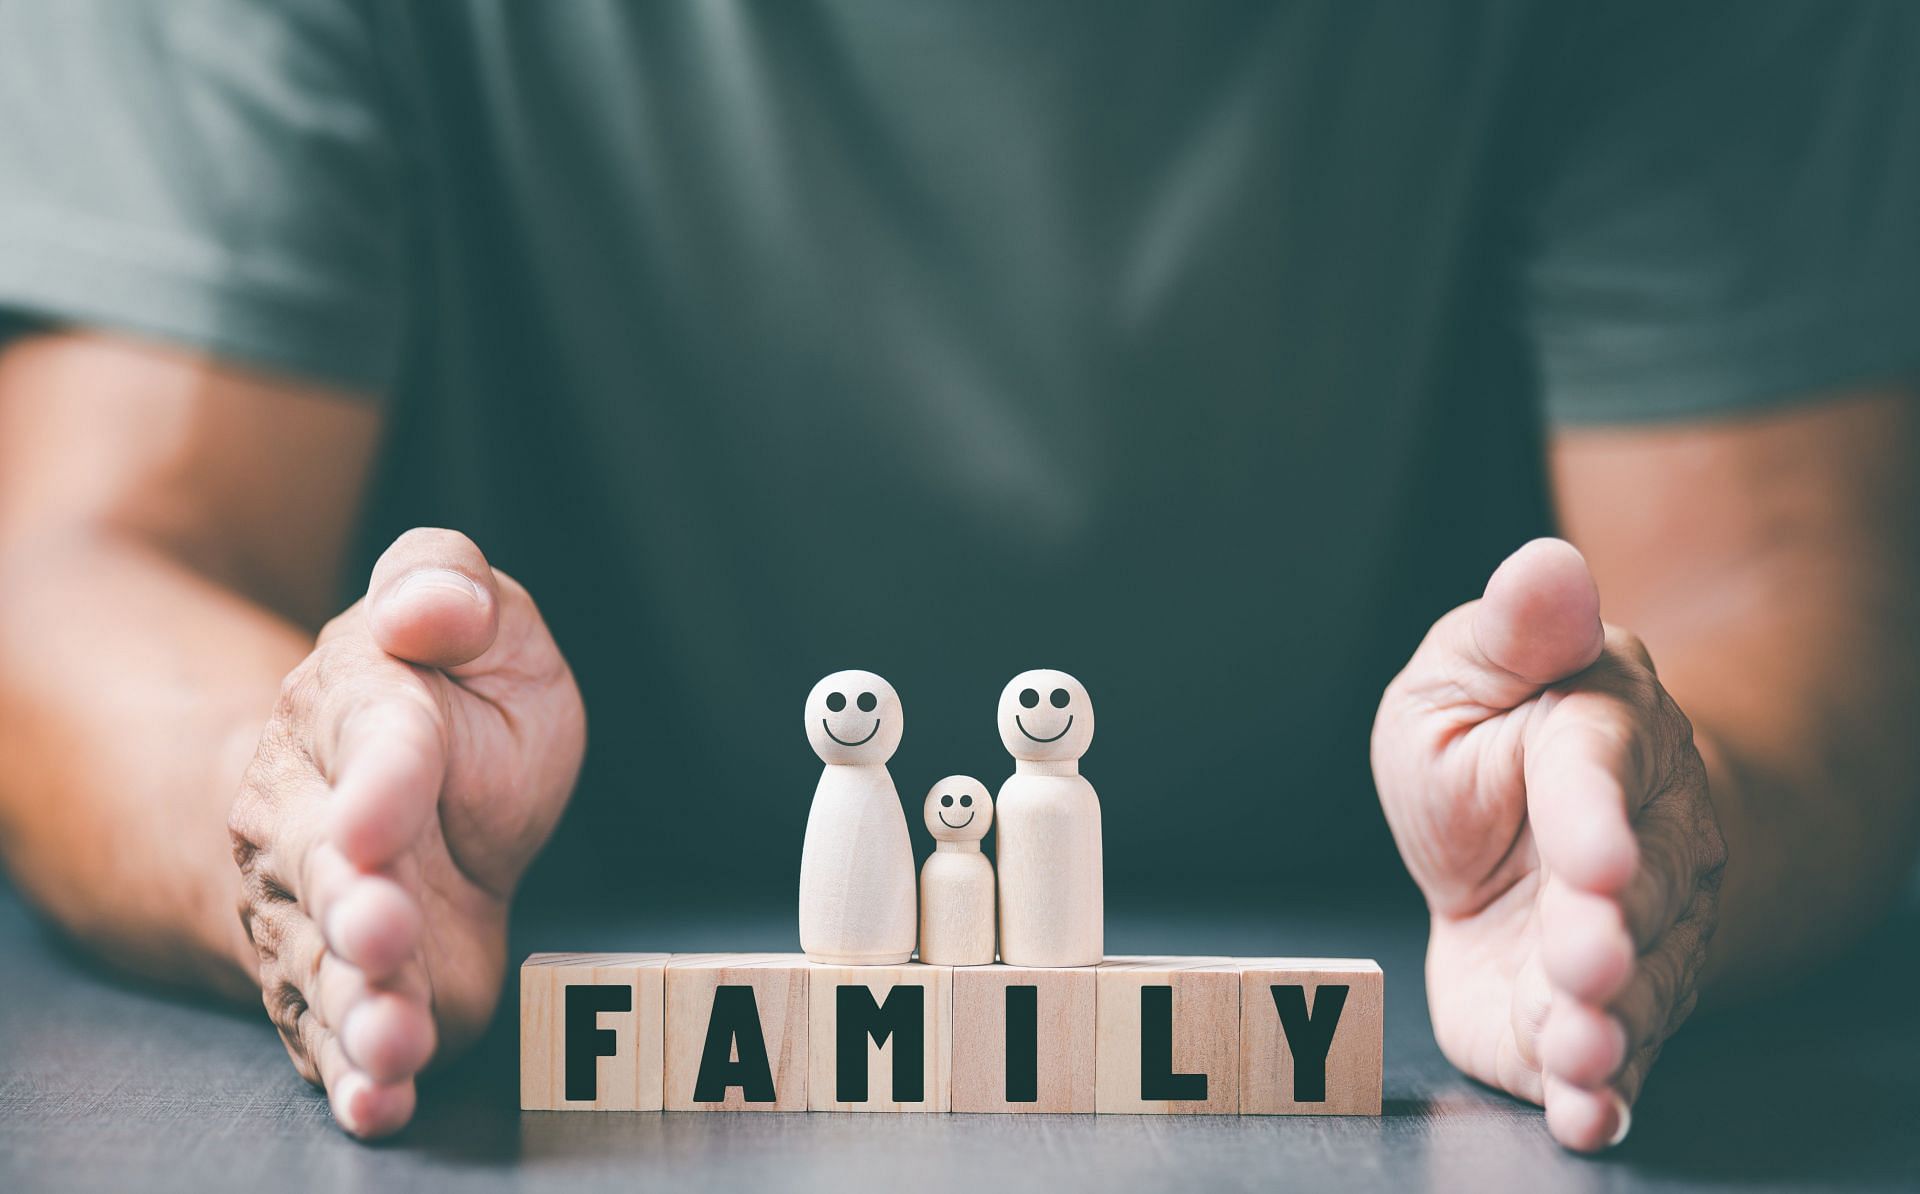 Family therapy is one of the most comprehensive tools we have now, why do we know less about it? (Image via Vecteezy/ Vecteezy)